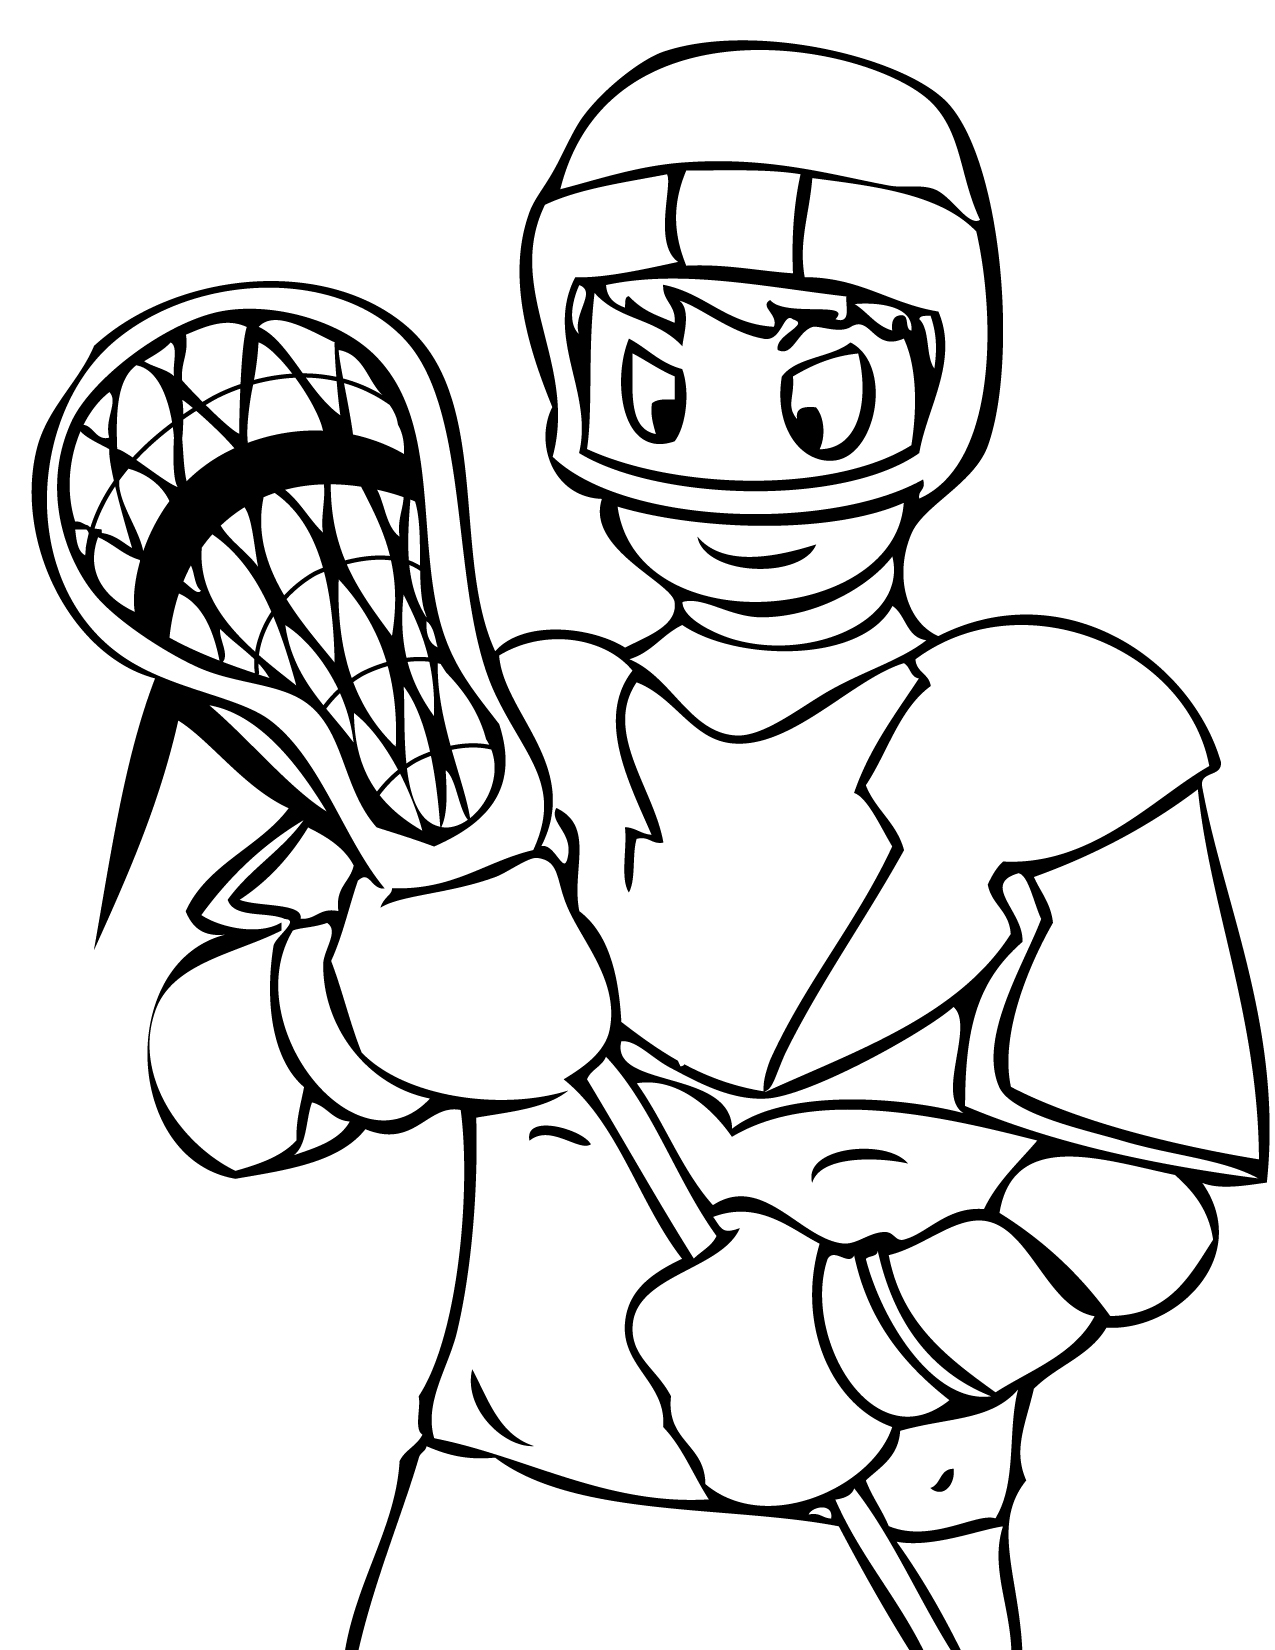 boy-playing-lacrosse-coloring-page-free-printable-coloring-pages-for-kids